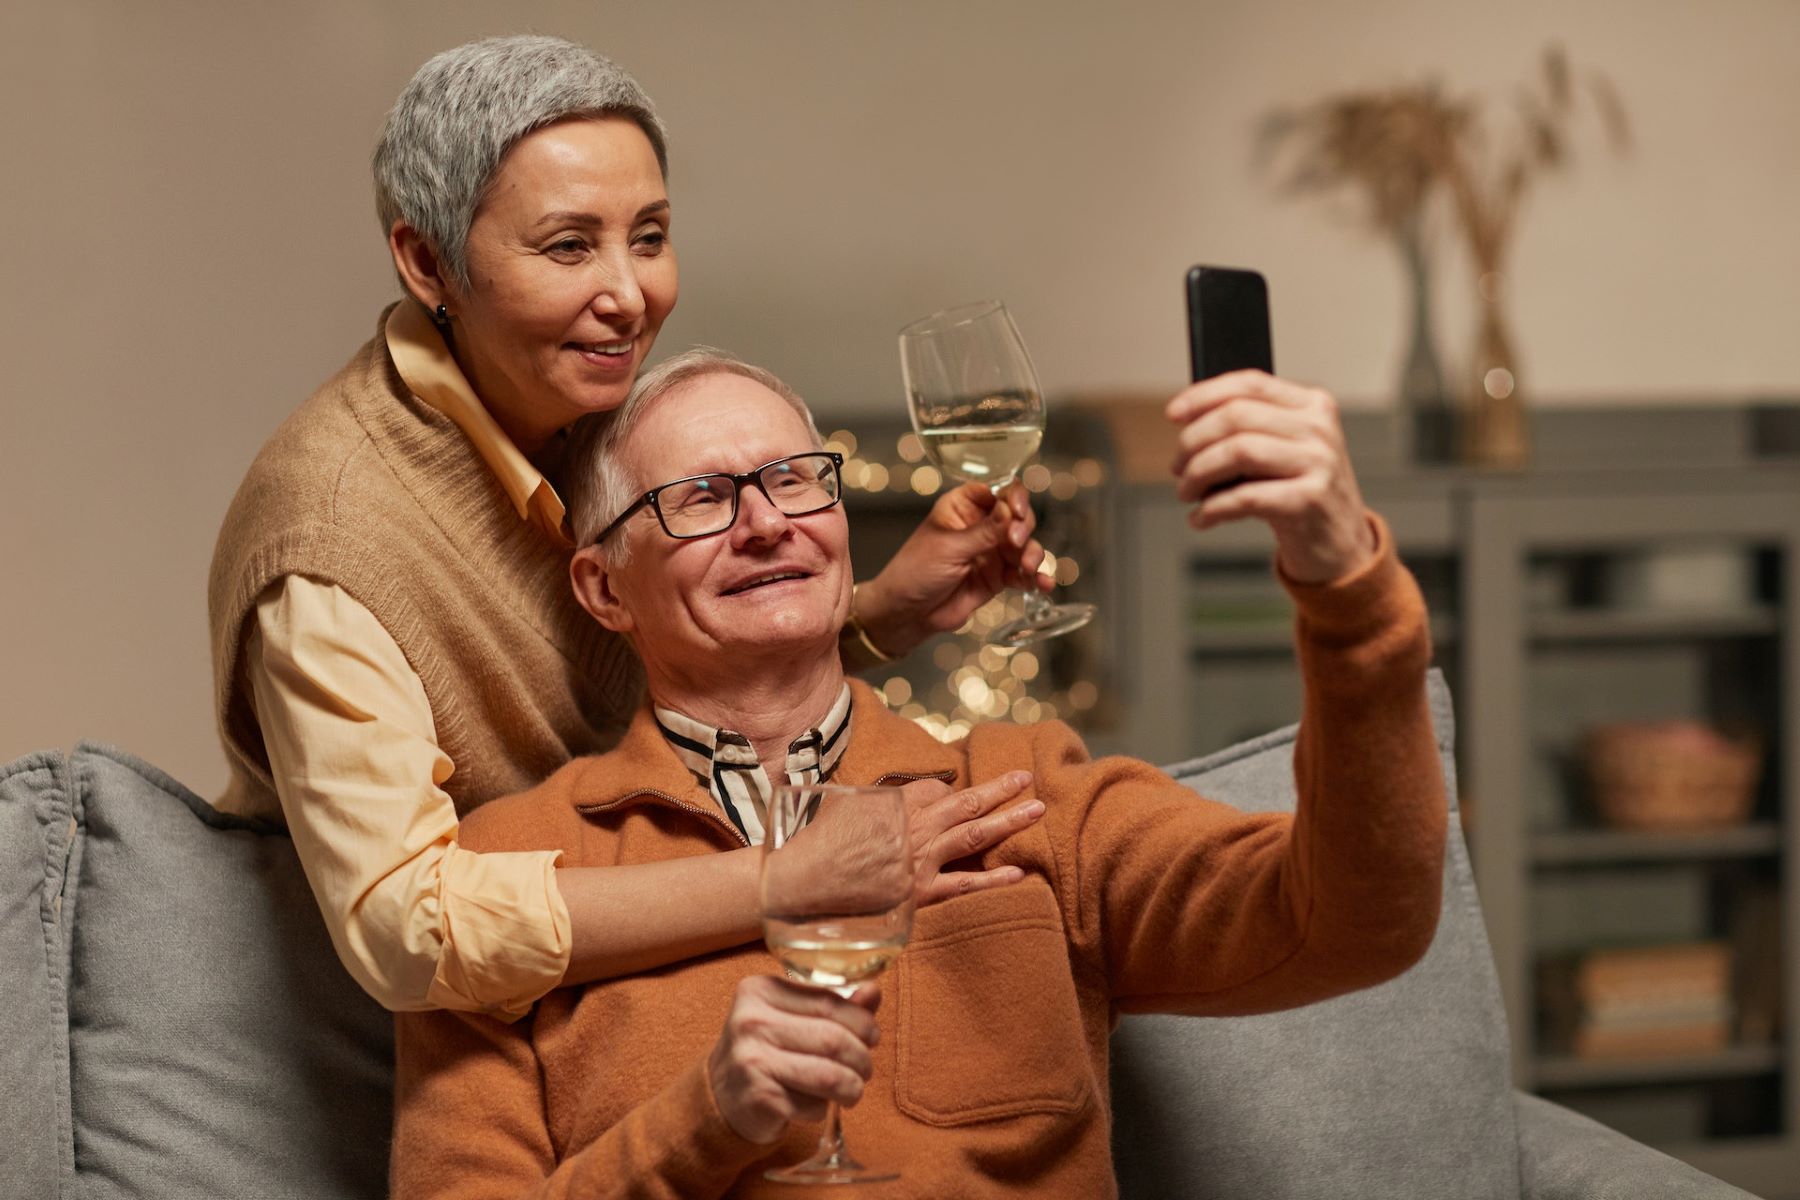 woman and man with glasses taking selfie